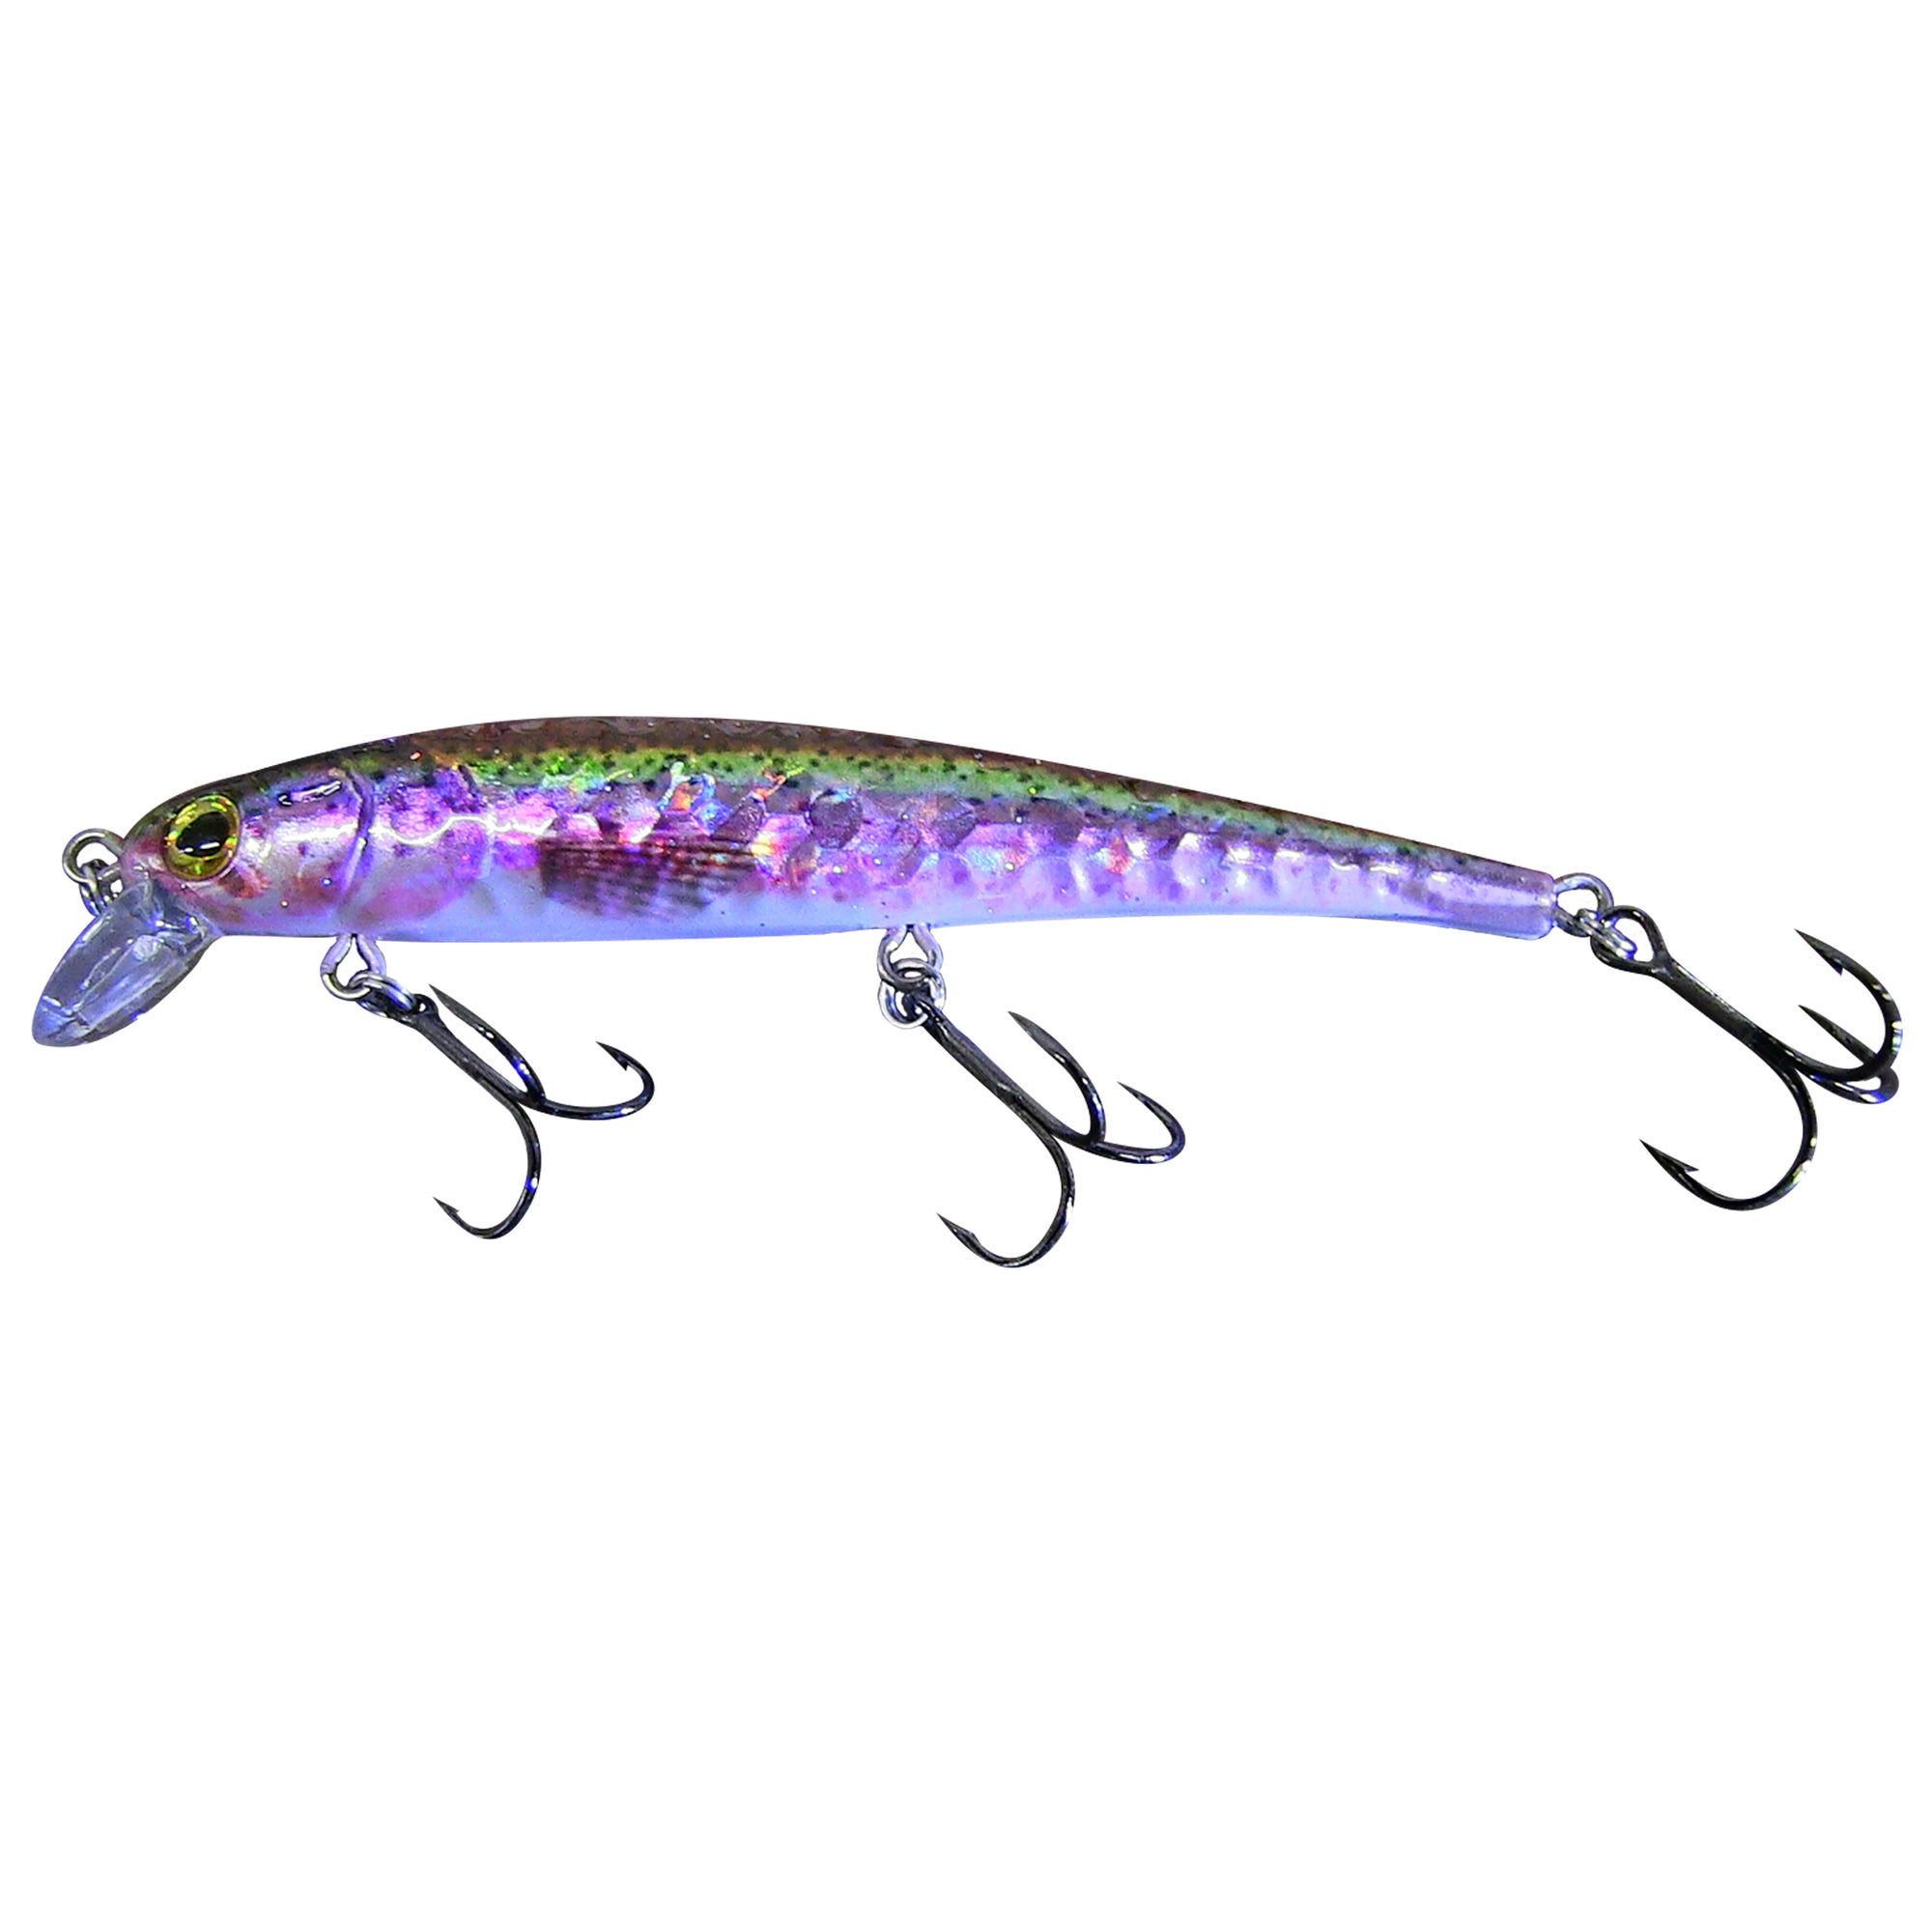 FOX Deviant Softbait, Shallow Diver Lure, Available in 2 patterns